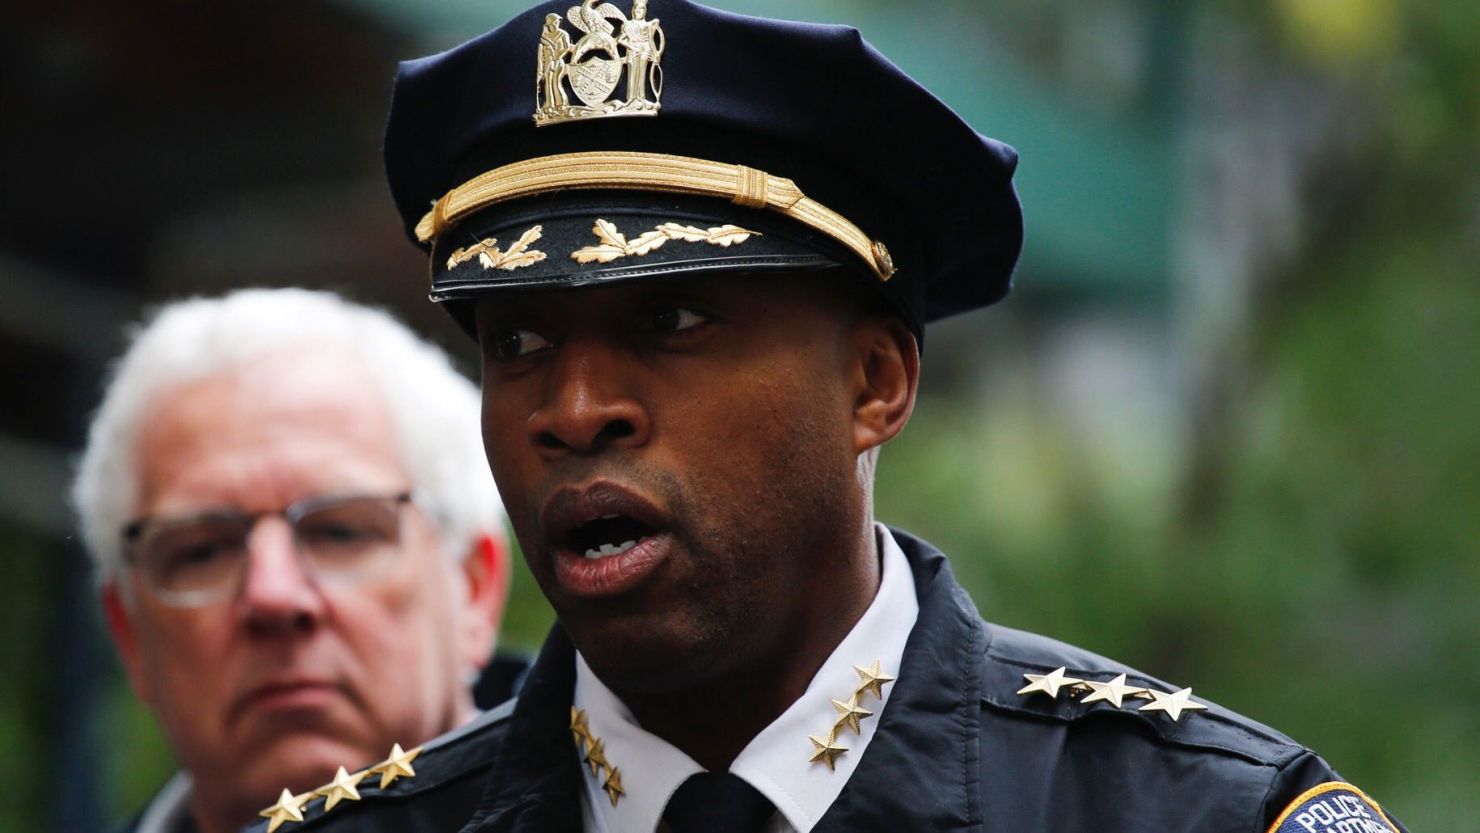 Rodney Harrison, the new Chief of Detectives for the NYPD.